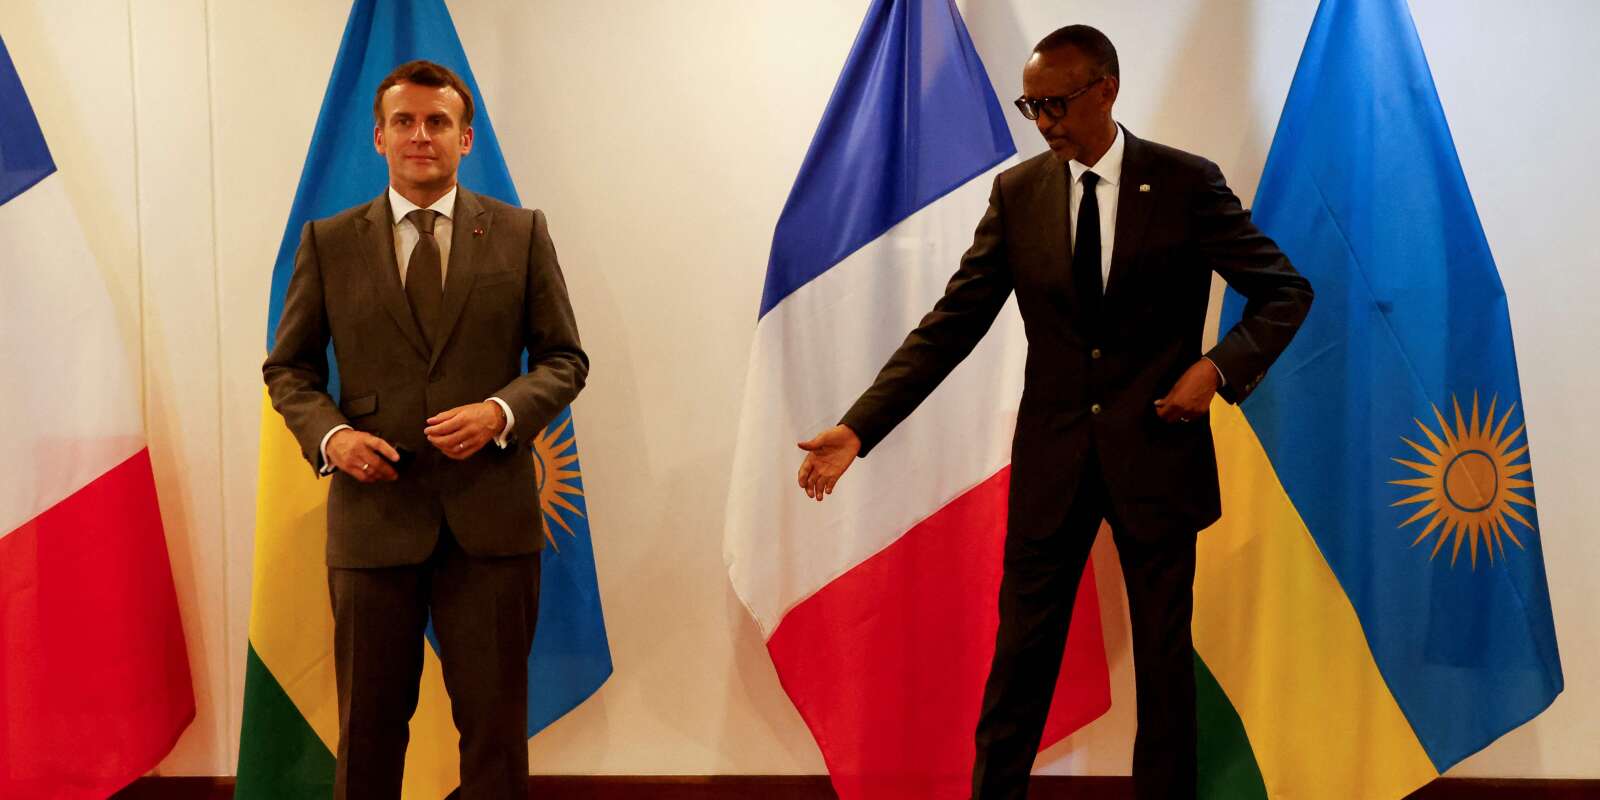 French President Emmanuel Macron and Rwandan President Paul Kagame pose for the photographers after their press conference and prior to their official diner at the Presidential Palace prior to their bilateral meeting in Kigali on May 27, 2021. French President Emmanuel Macron arrived in Rwanda on May 27, 2021, for a highly symbolic visit aimed at moving on from three decades of diplomatic tensions over France's role in the 1994 genocide in the country. Macron is the first French leader since 2010 to visit the East African nation, which has long accused France of complicity in the killing of some 800,000 mostly Tutsi Rwandans. / AFP / Ludovic MARIN